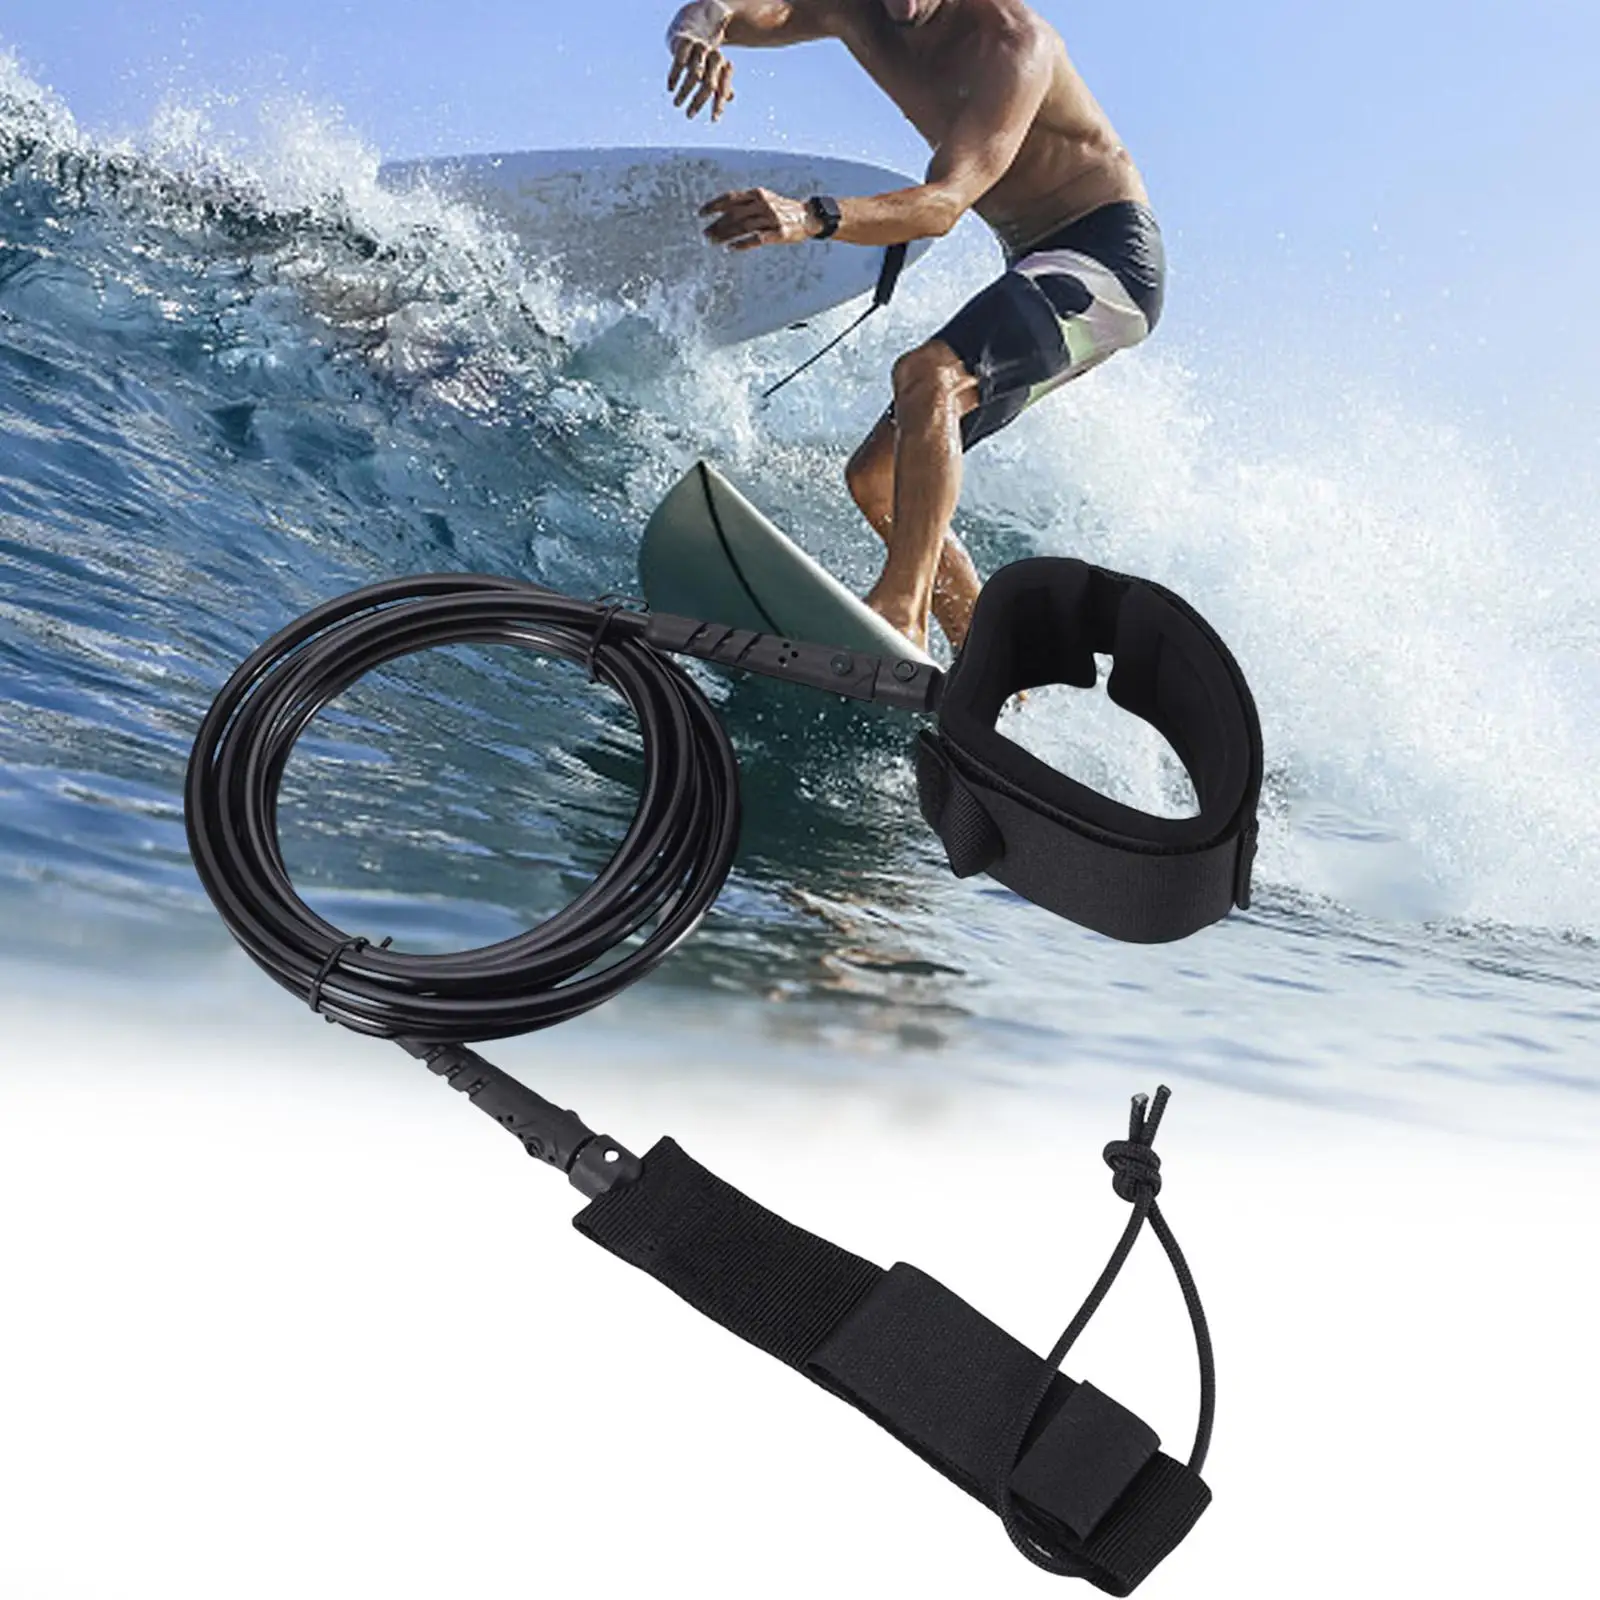 Surfboard Leash Straight Stand up Paddle Board Leash Strong SUP Wrist Strap for Long Boards Short Boards Surfboard Raft Boating